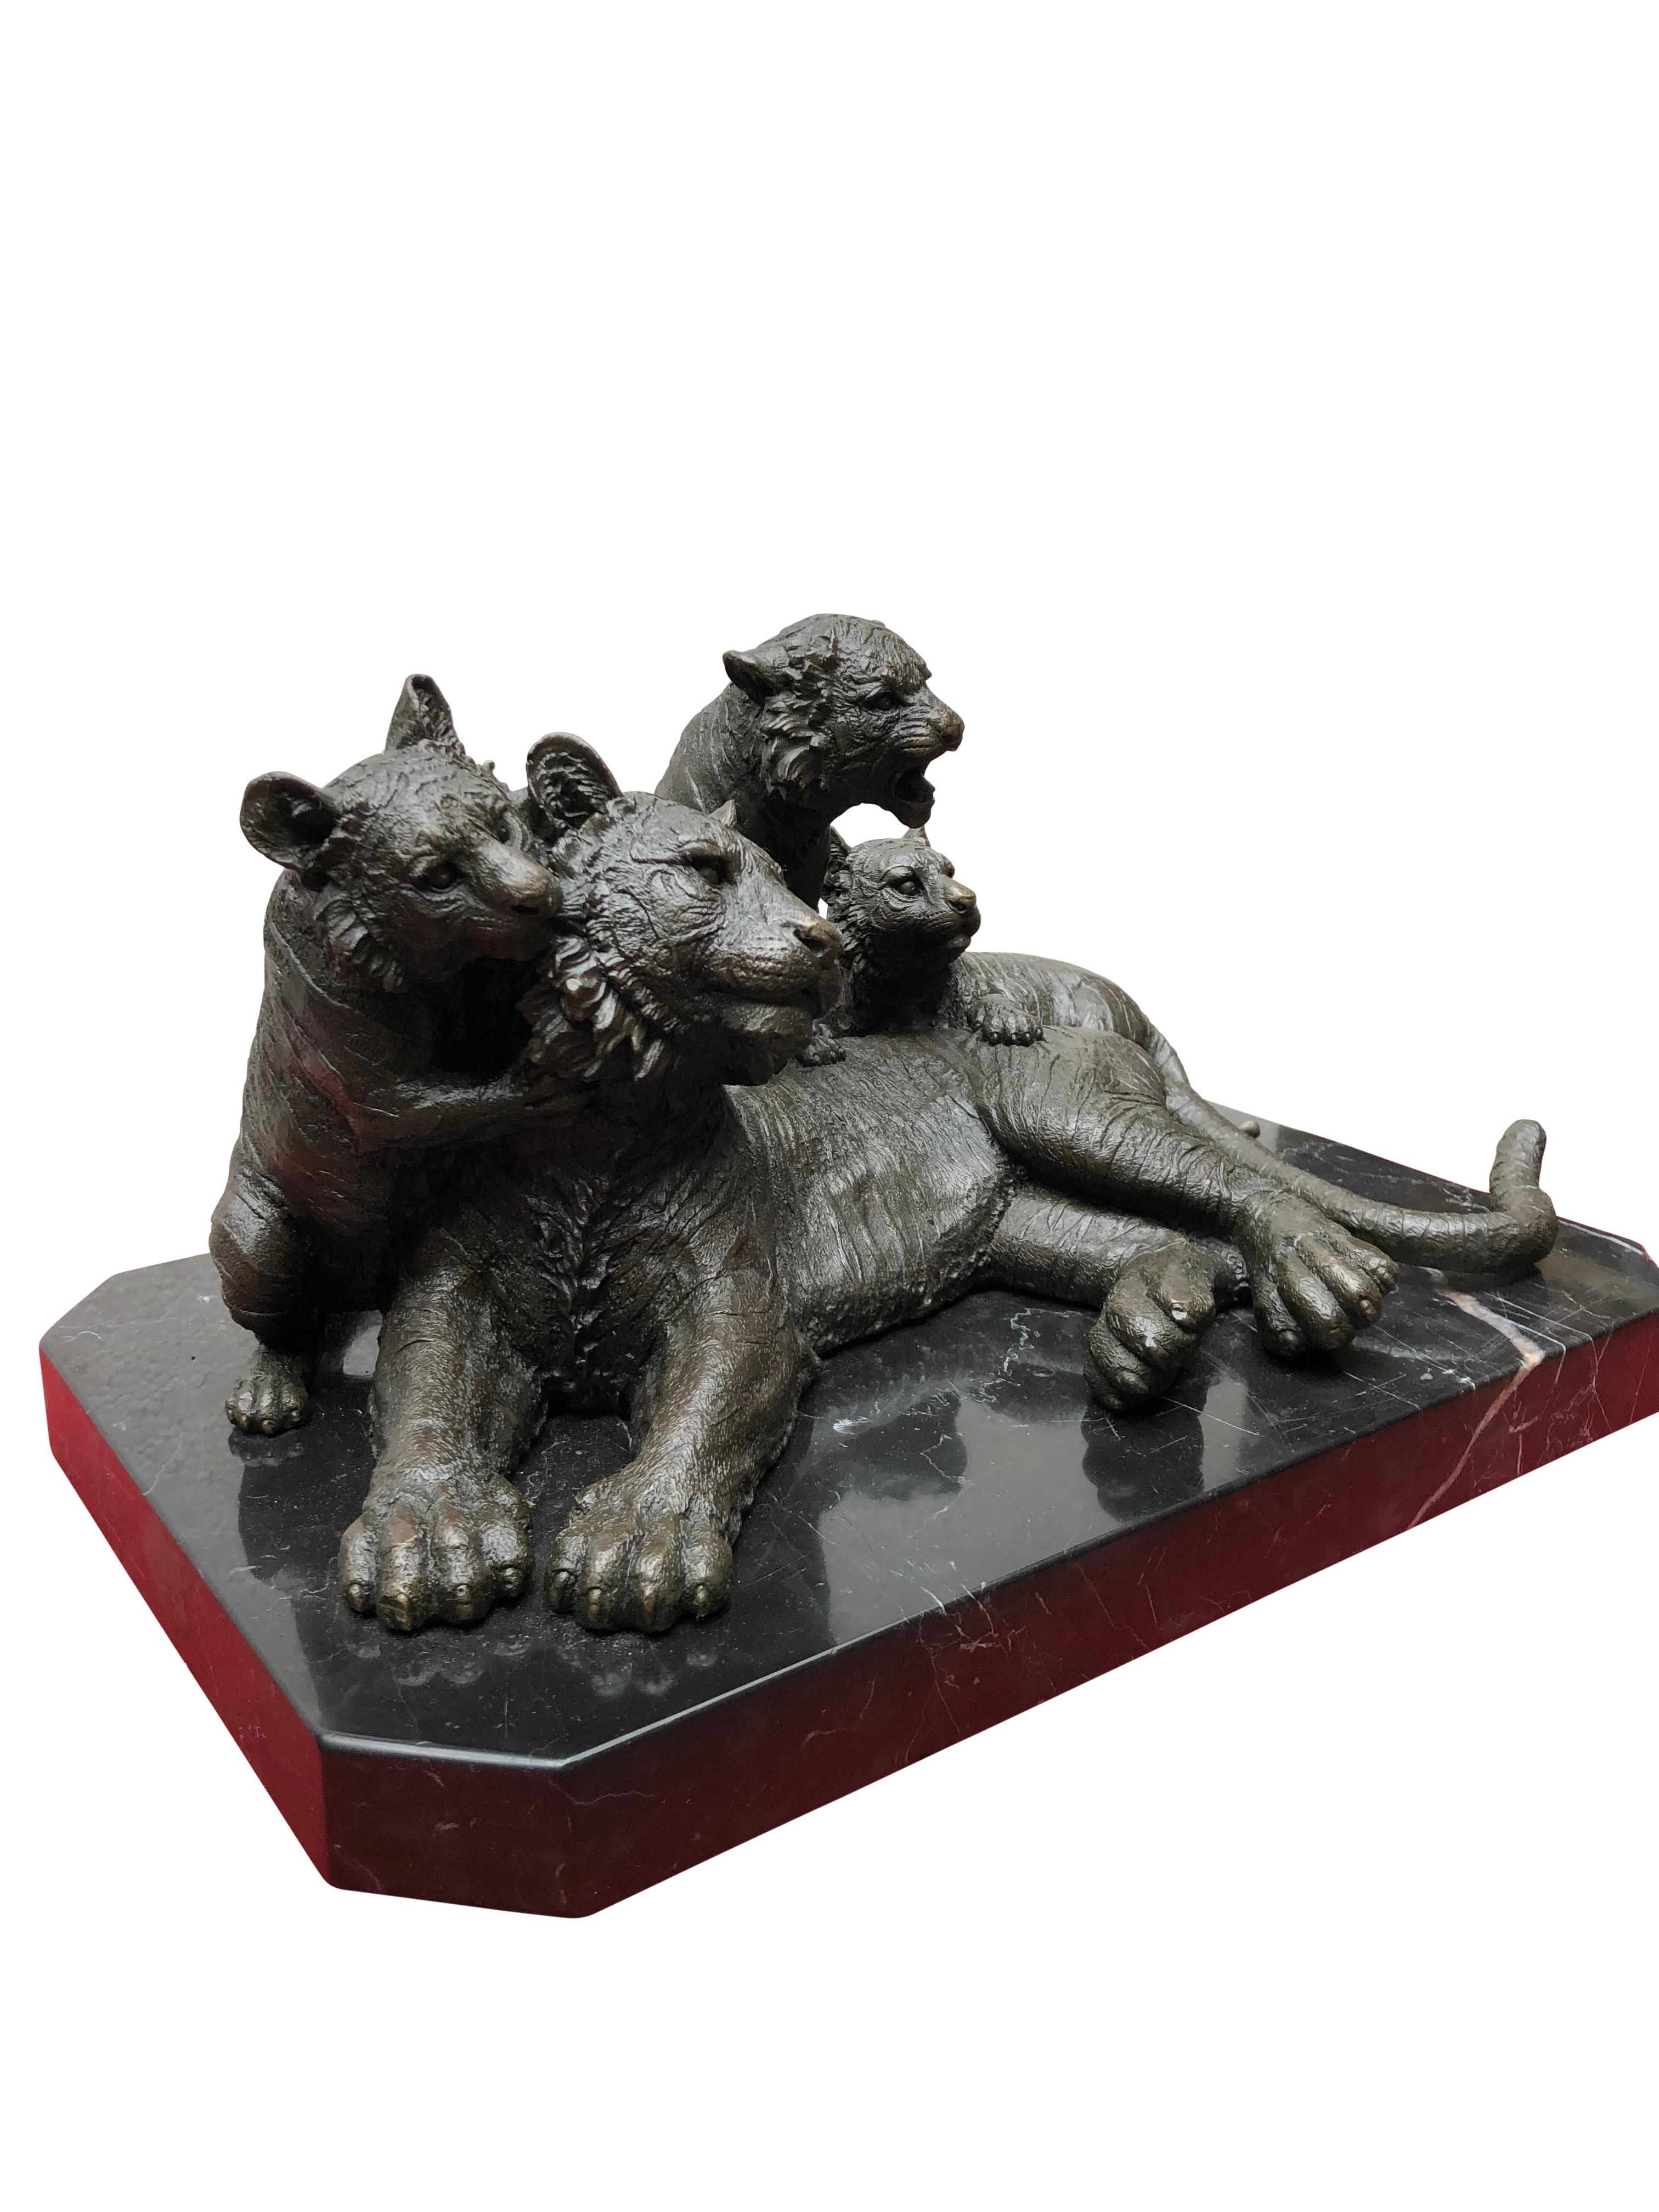 A gorgeous bronze casting of a tiger and her three cubs. Artist has really captured the energy to the scene with great skill. Stands on the black marble base which is smooth and chip free. Offered in excellent shape ready for home use right away.